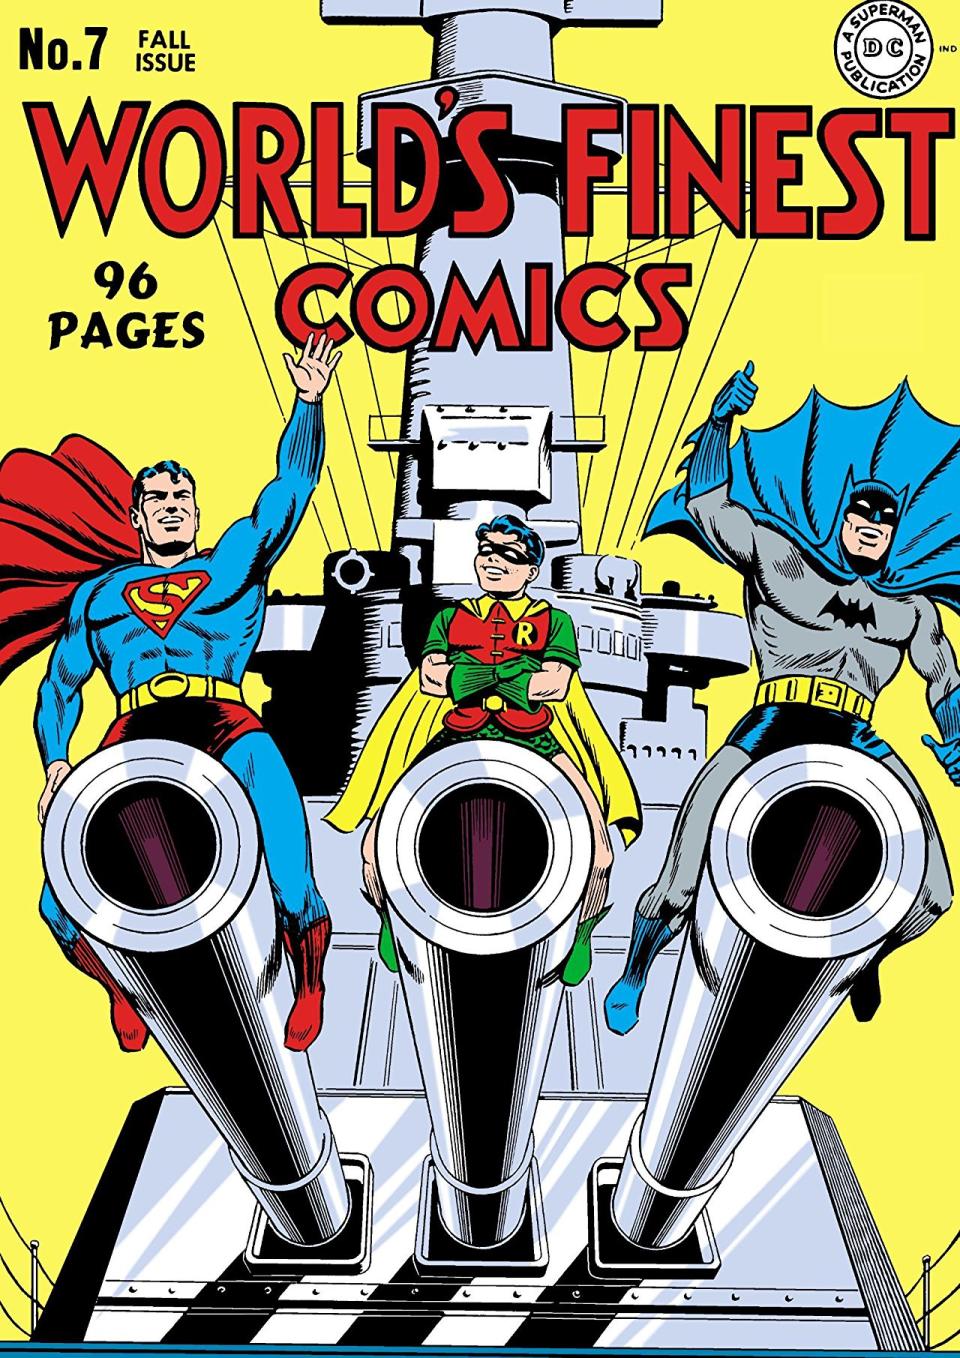 80 BATMAN Covers That Are Hilariously Weird_41